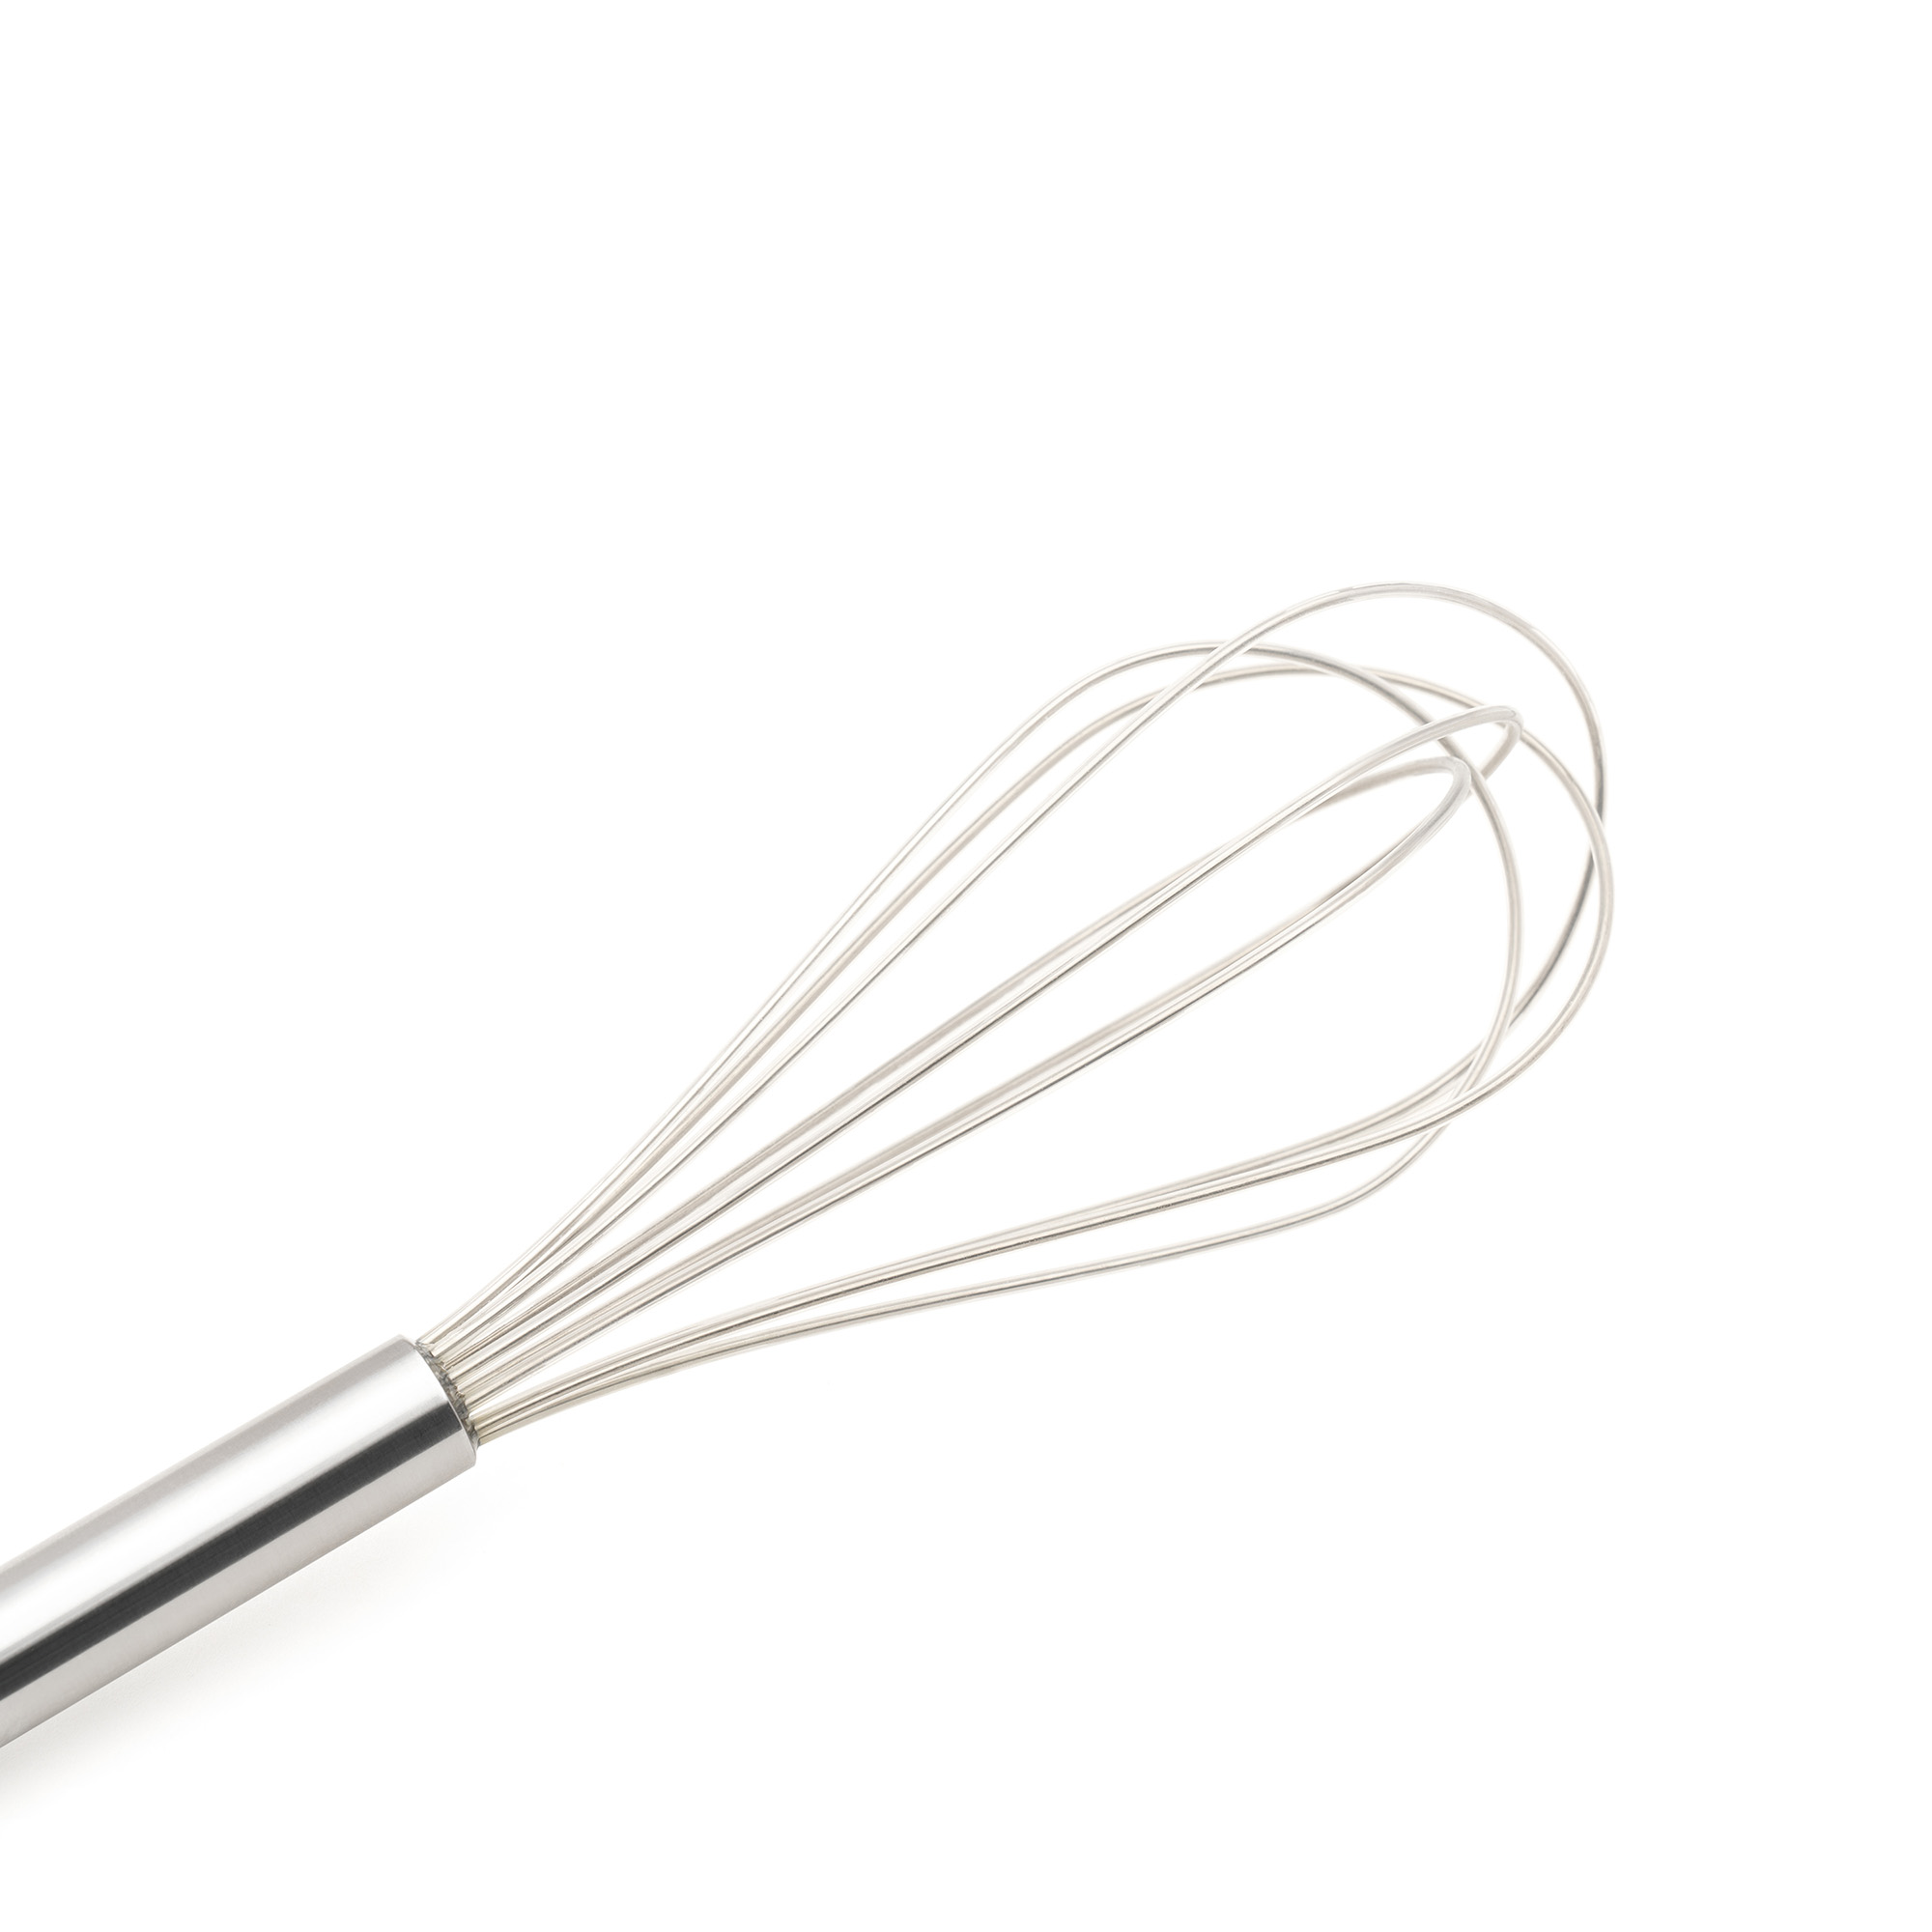 Cuisipro Frosted Silicone Egg Whisk, 8 Inch - image 2 of 3